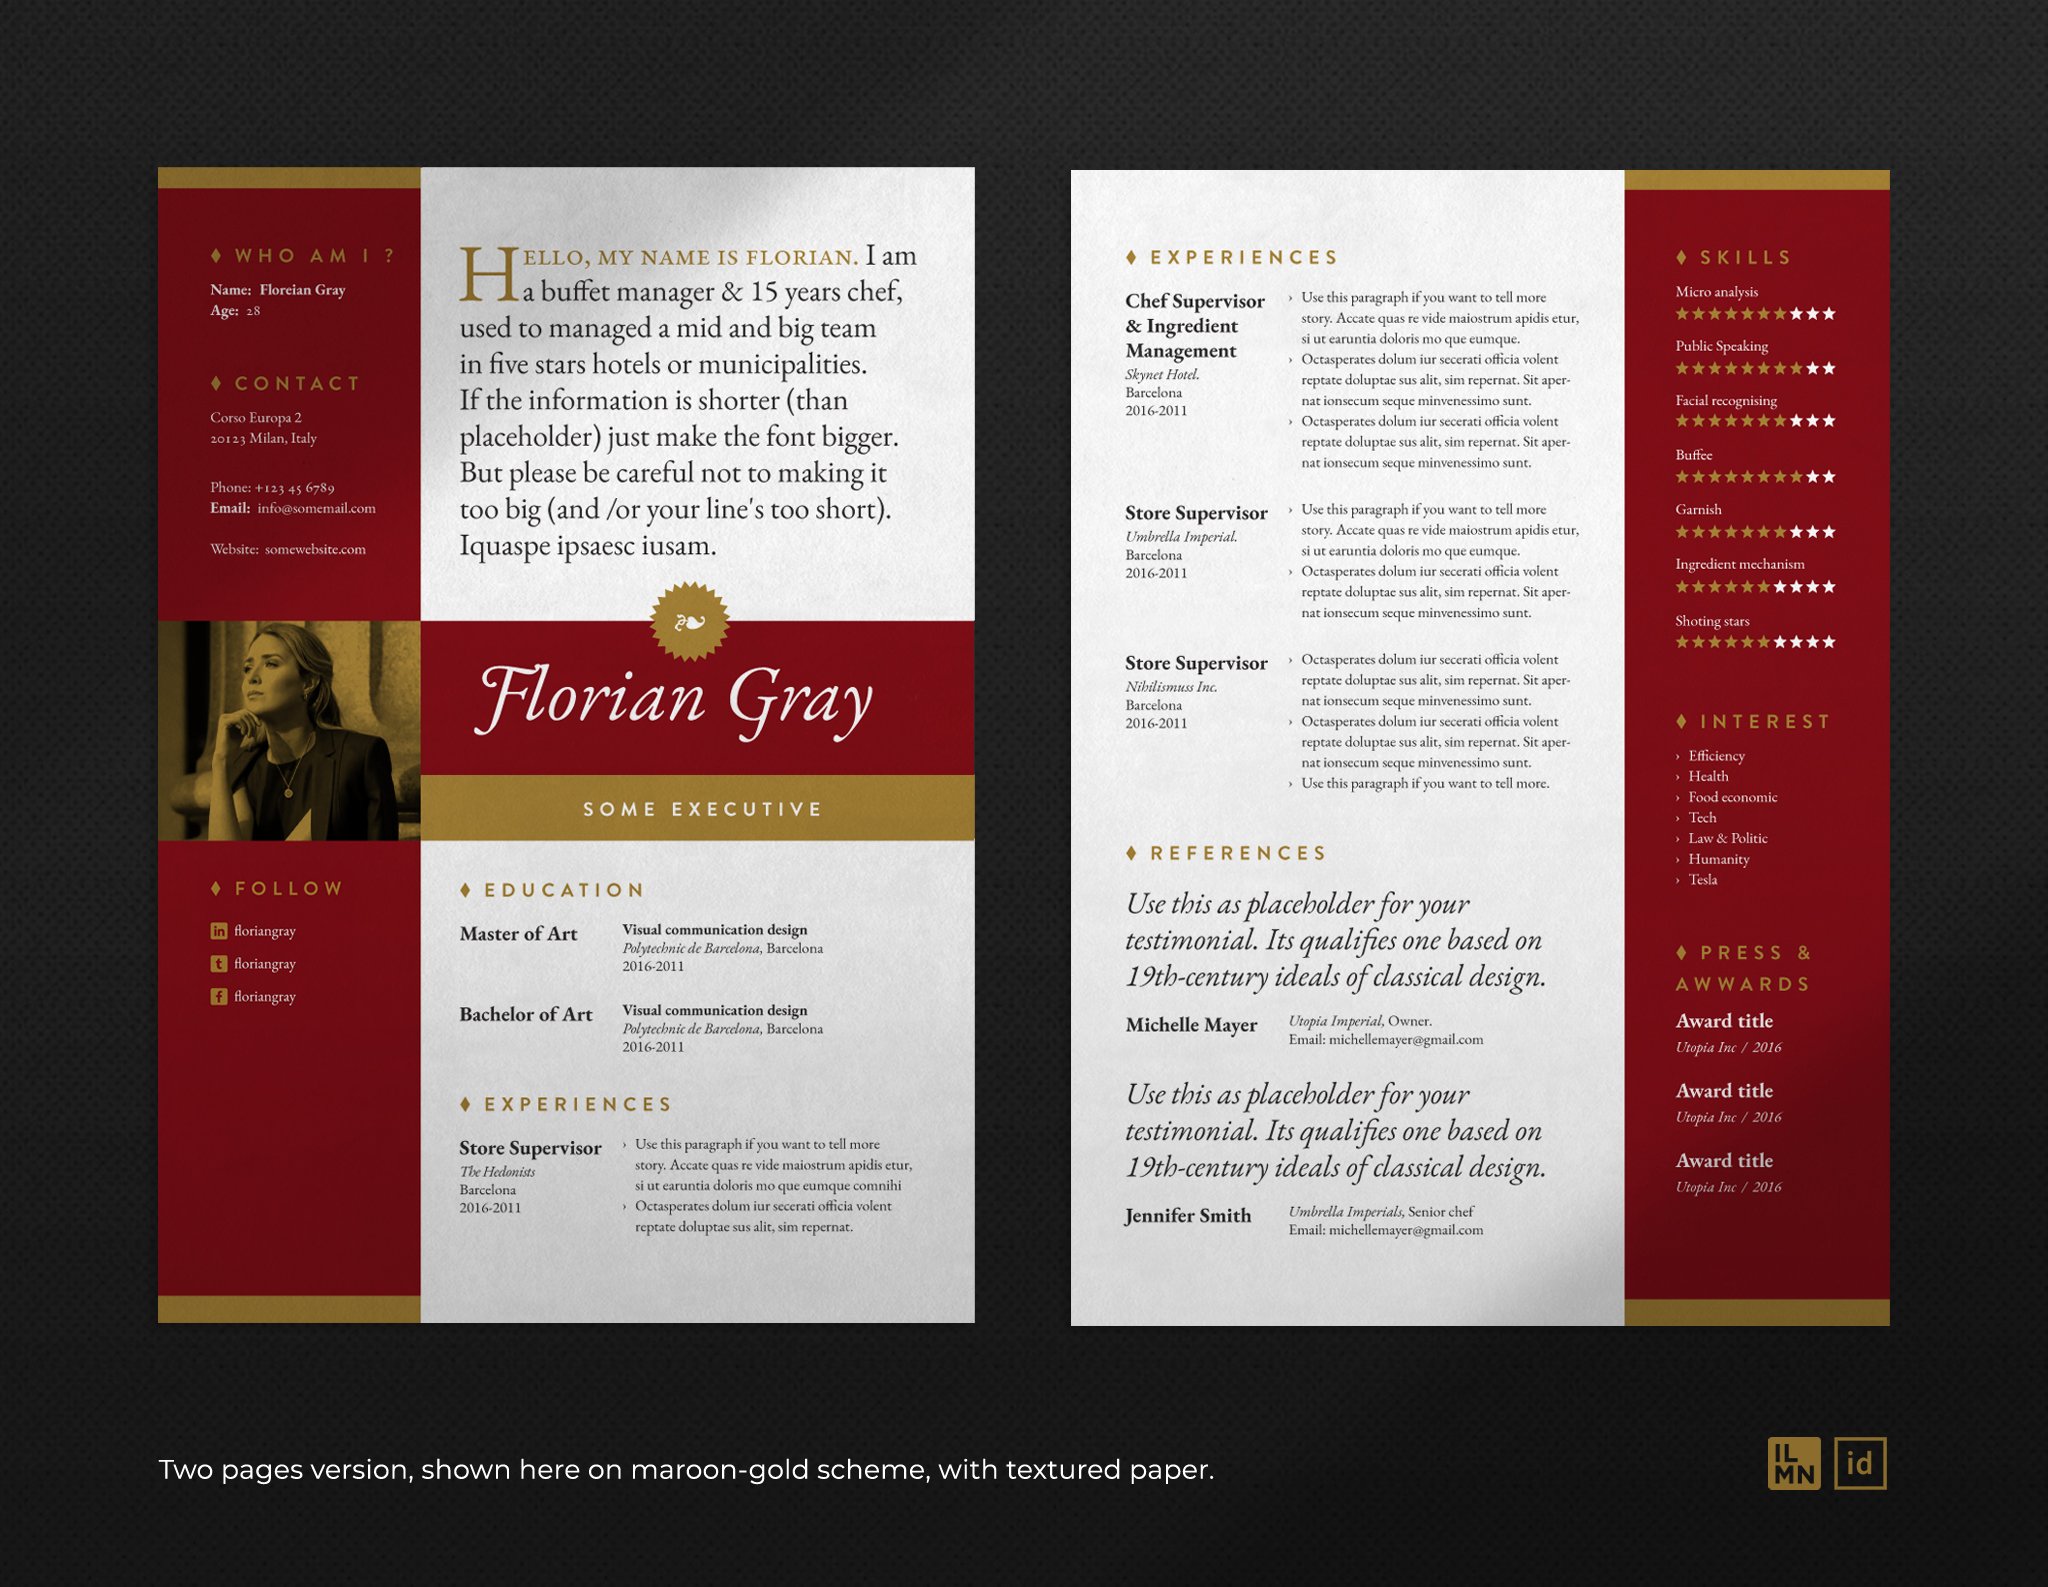 Florian Gray - Resume Template preview image.